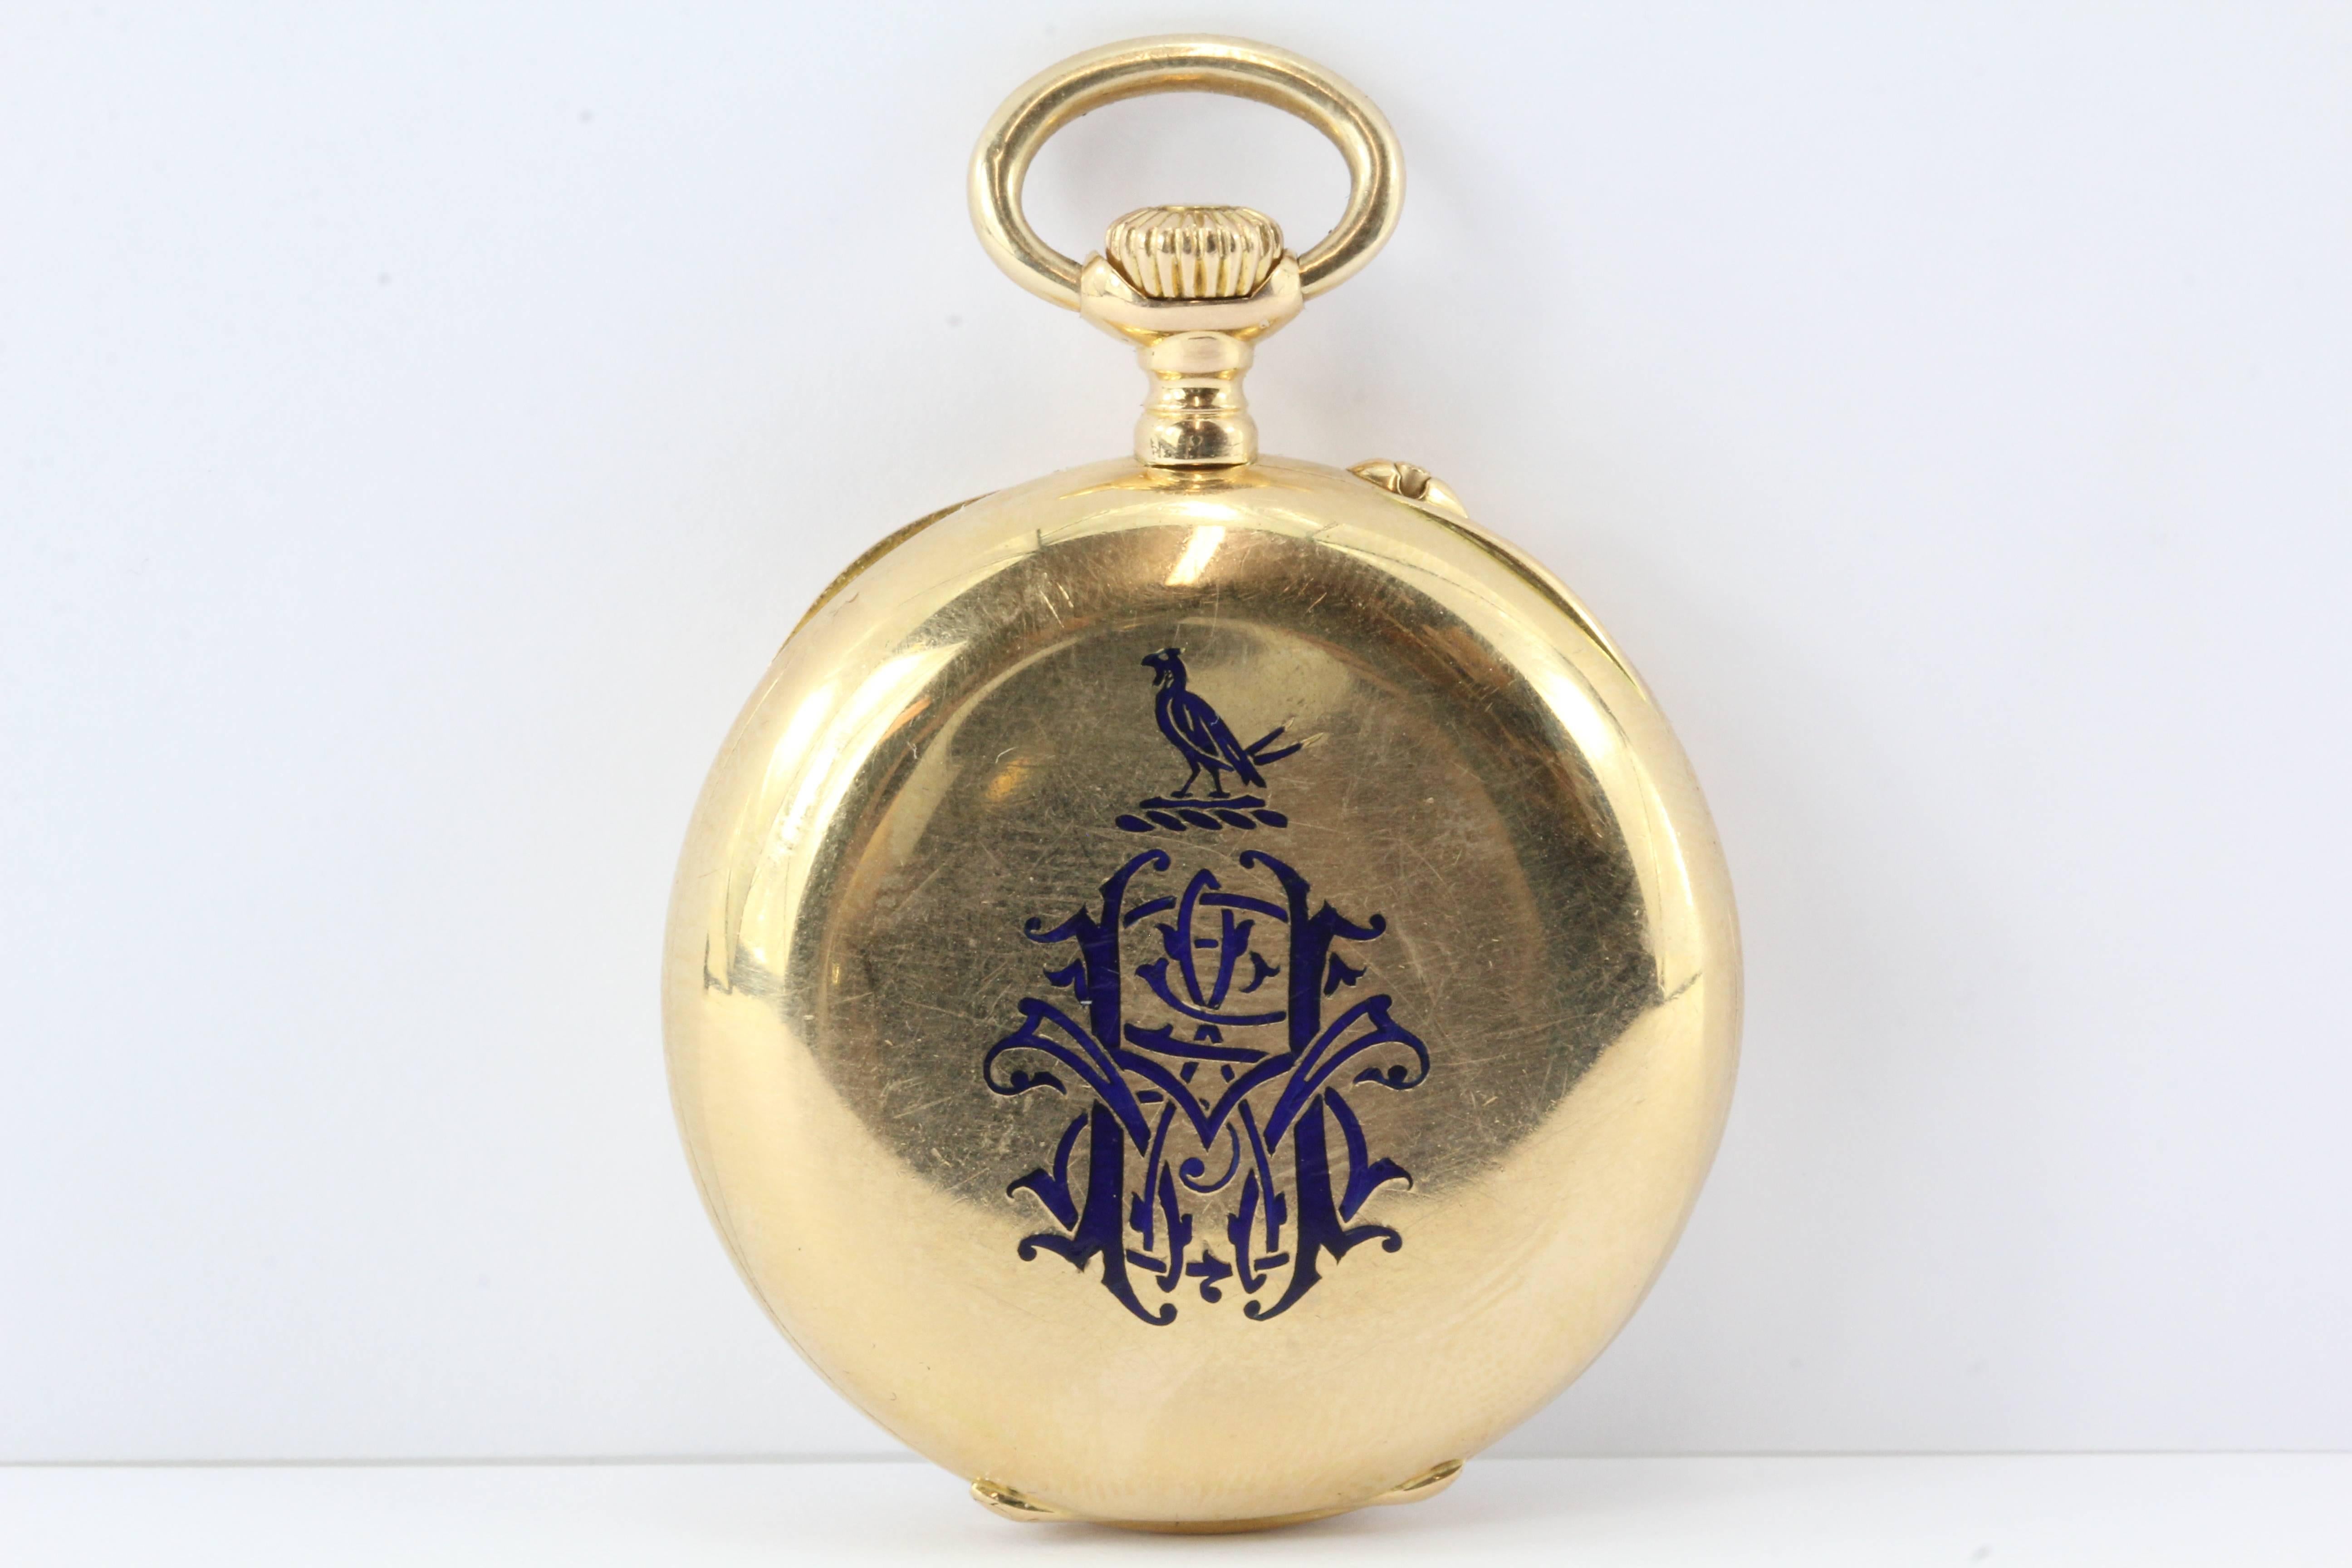 Antique Vacheron & Constantin 18K Gold Blue Enamel 31mm Pocket Watch in original Case. The watch is in excellent estate condition and ready to use. It is running perfectly. The watch was just professionally serviced 11/16. The watch dates from